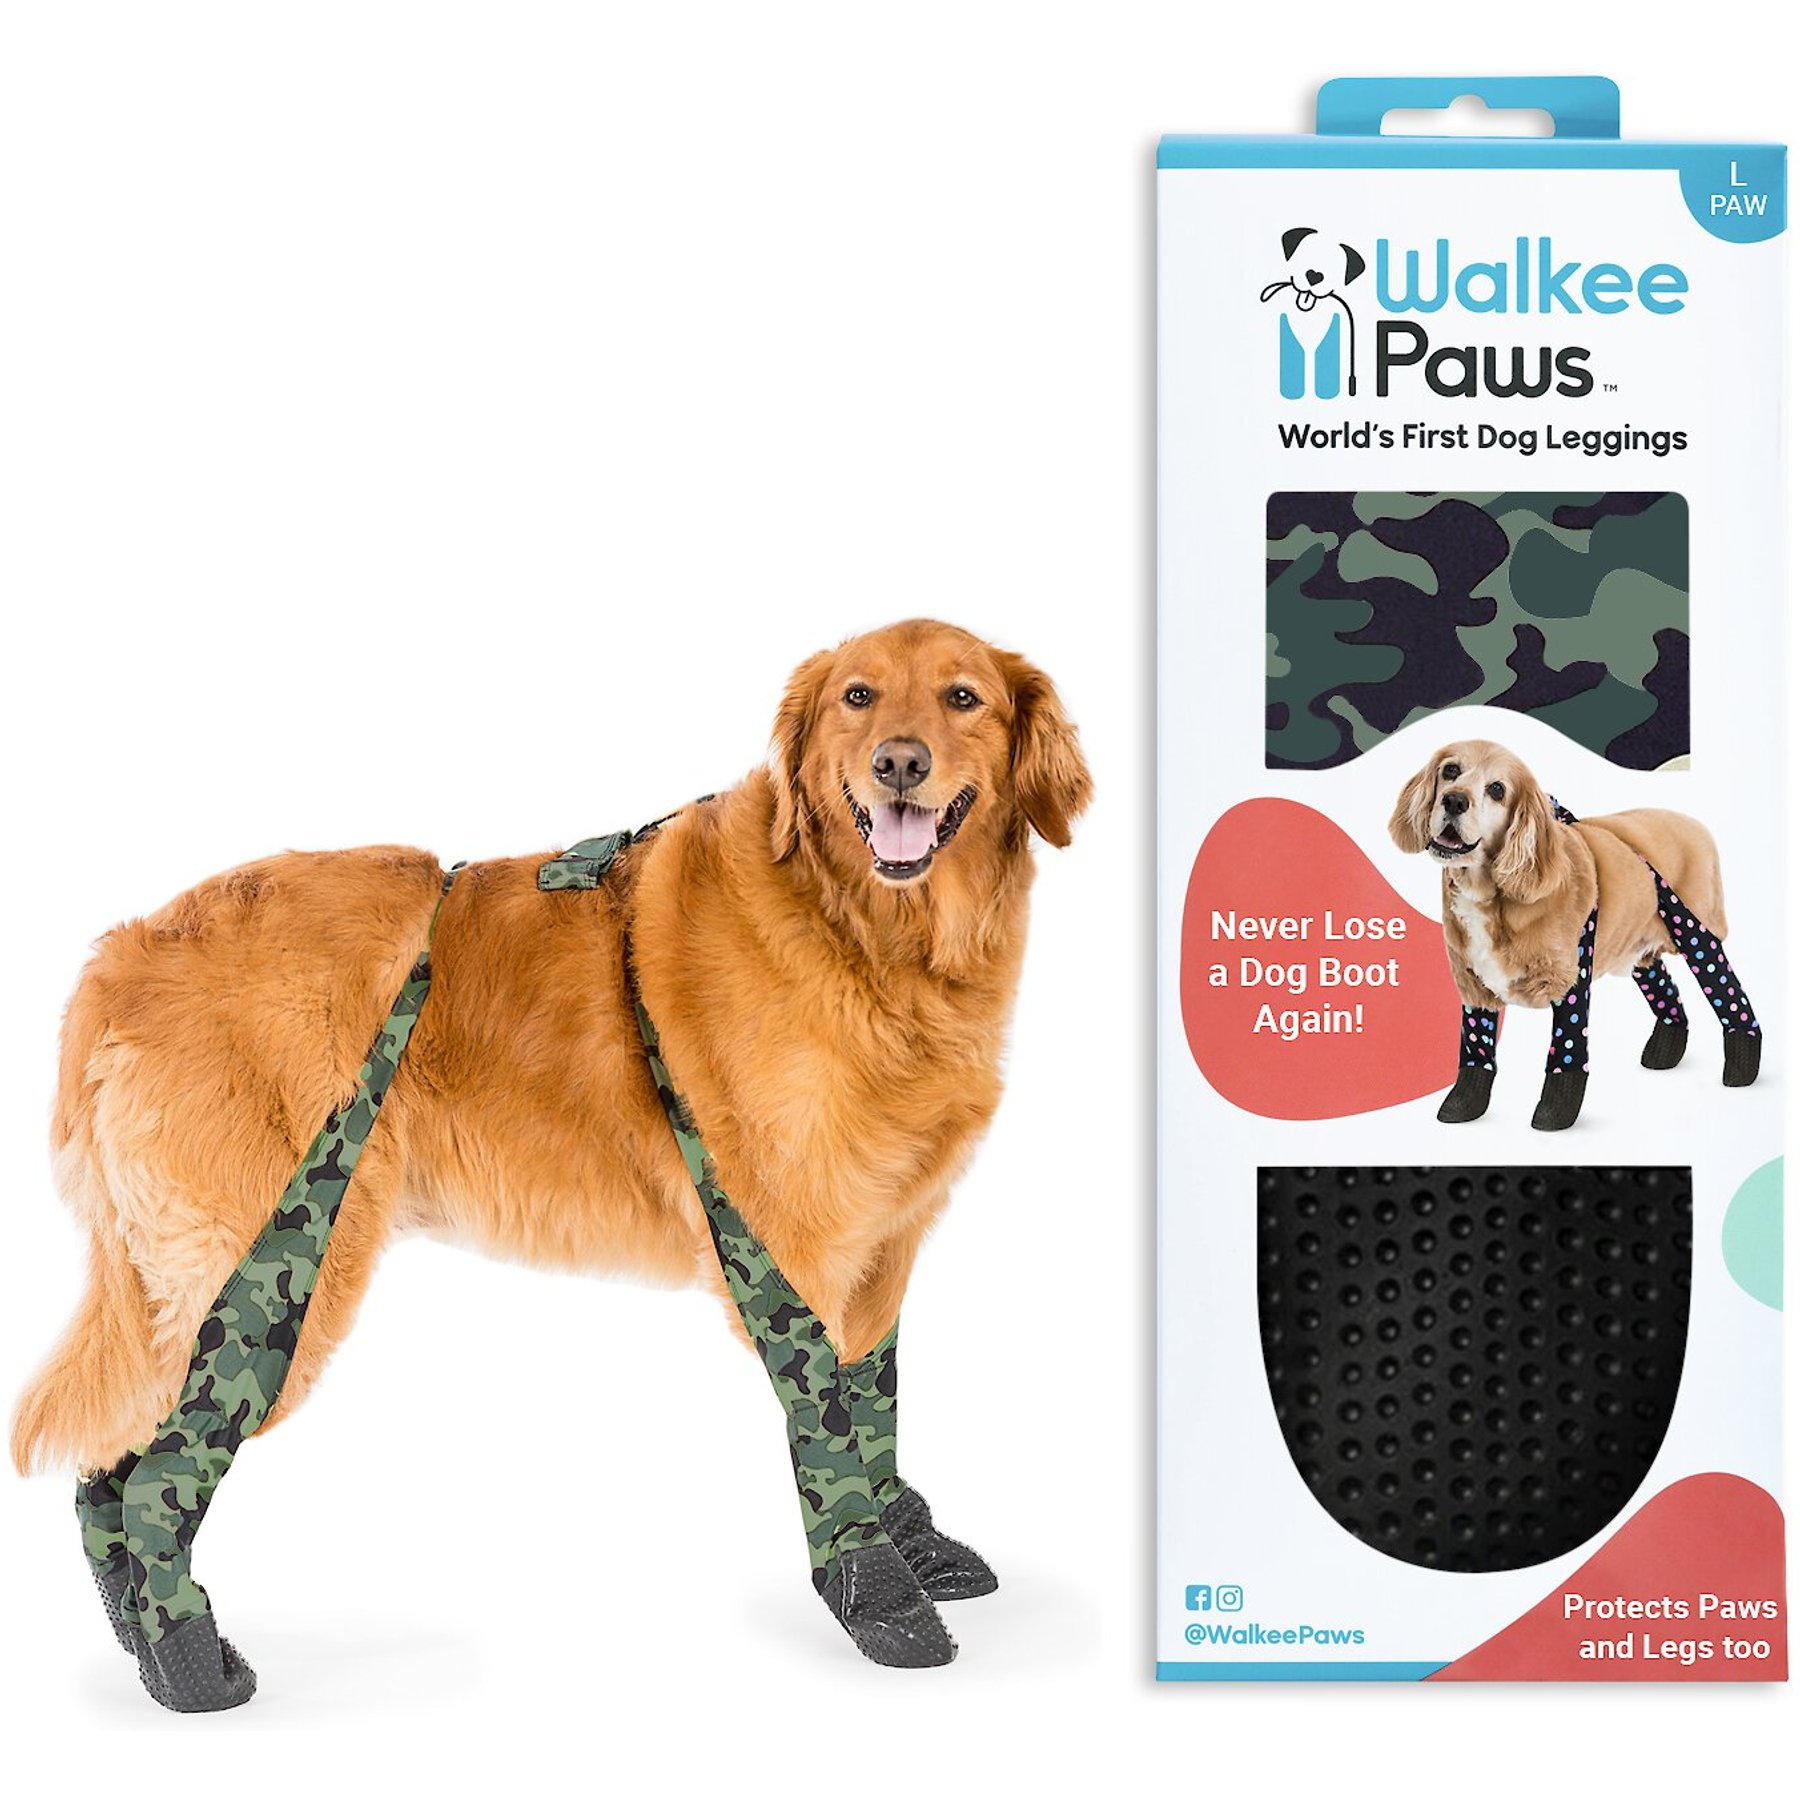 Buy Walkee Paws Waterproof Dog Leggings, Keep Dog's Paws and Legs Clean &  Dry On Walks, Protect Paws from Spring Rain & Summer Heat